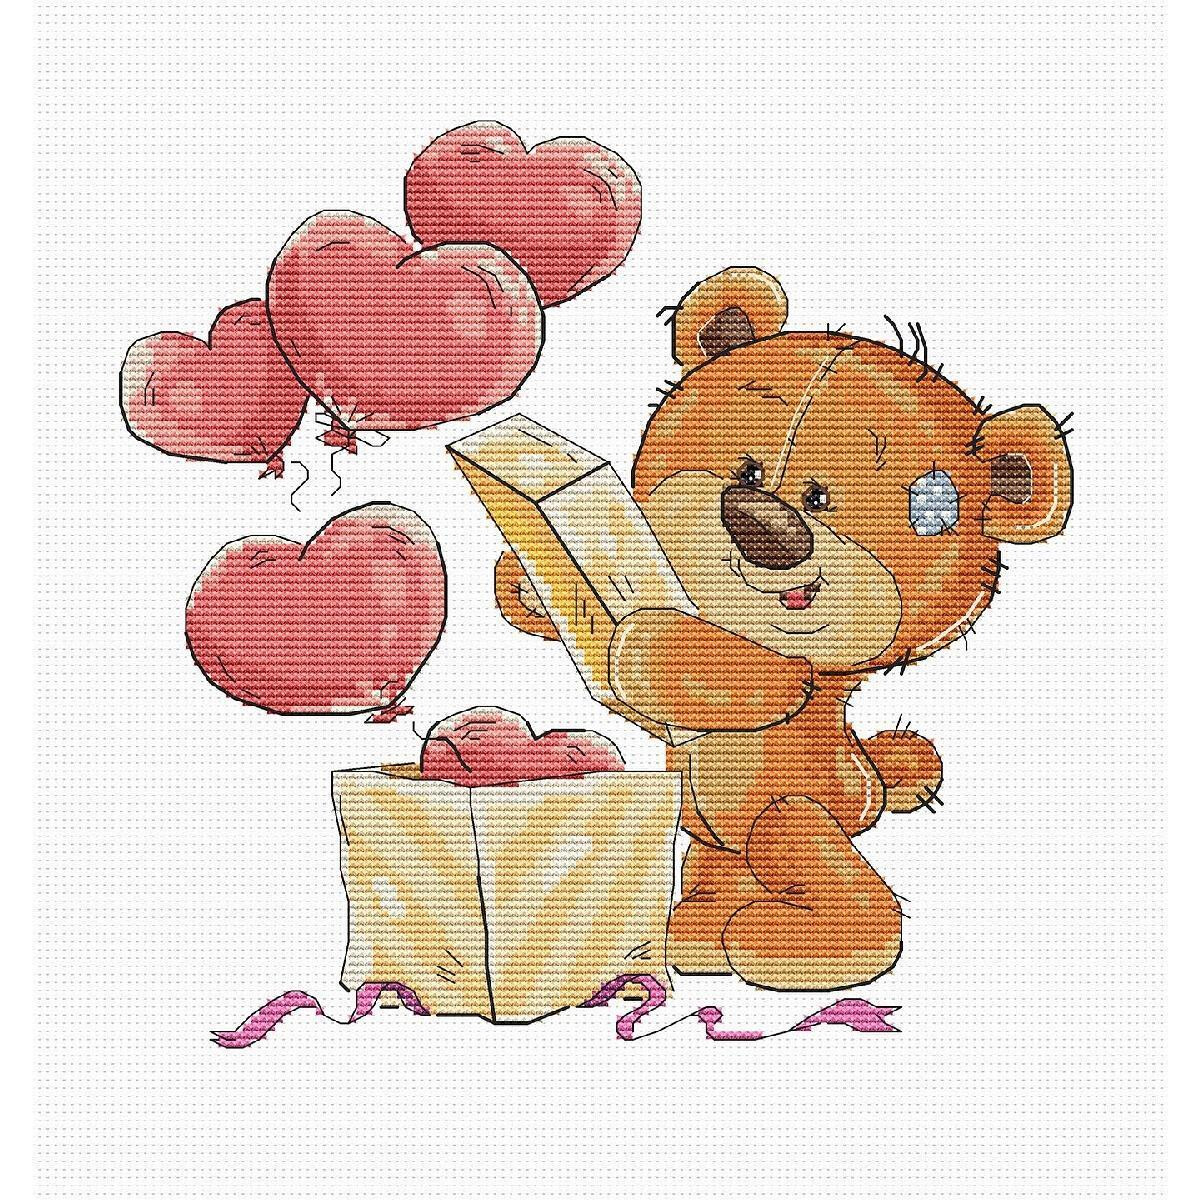 Luca-S counted Cross Stitch kit "Tyddy-bear with...